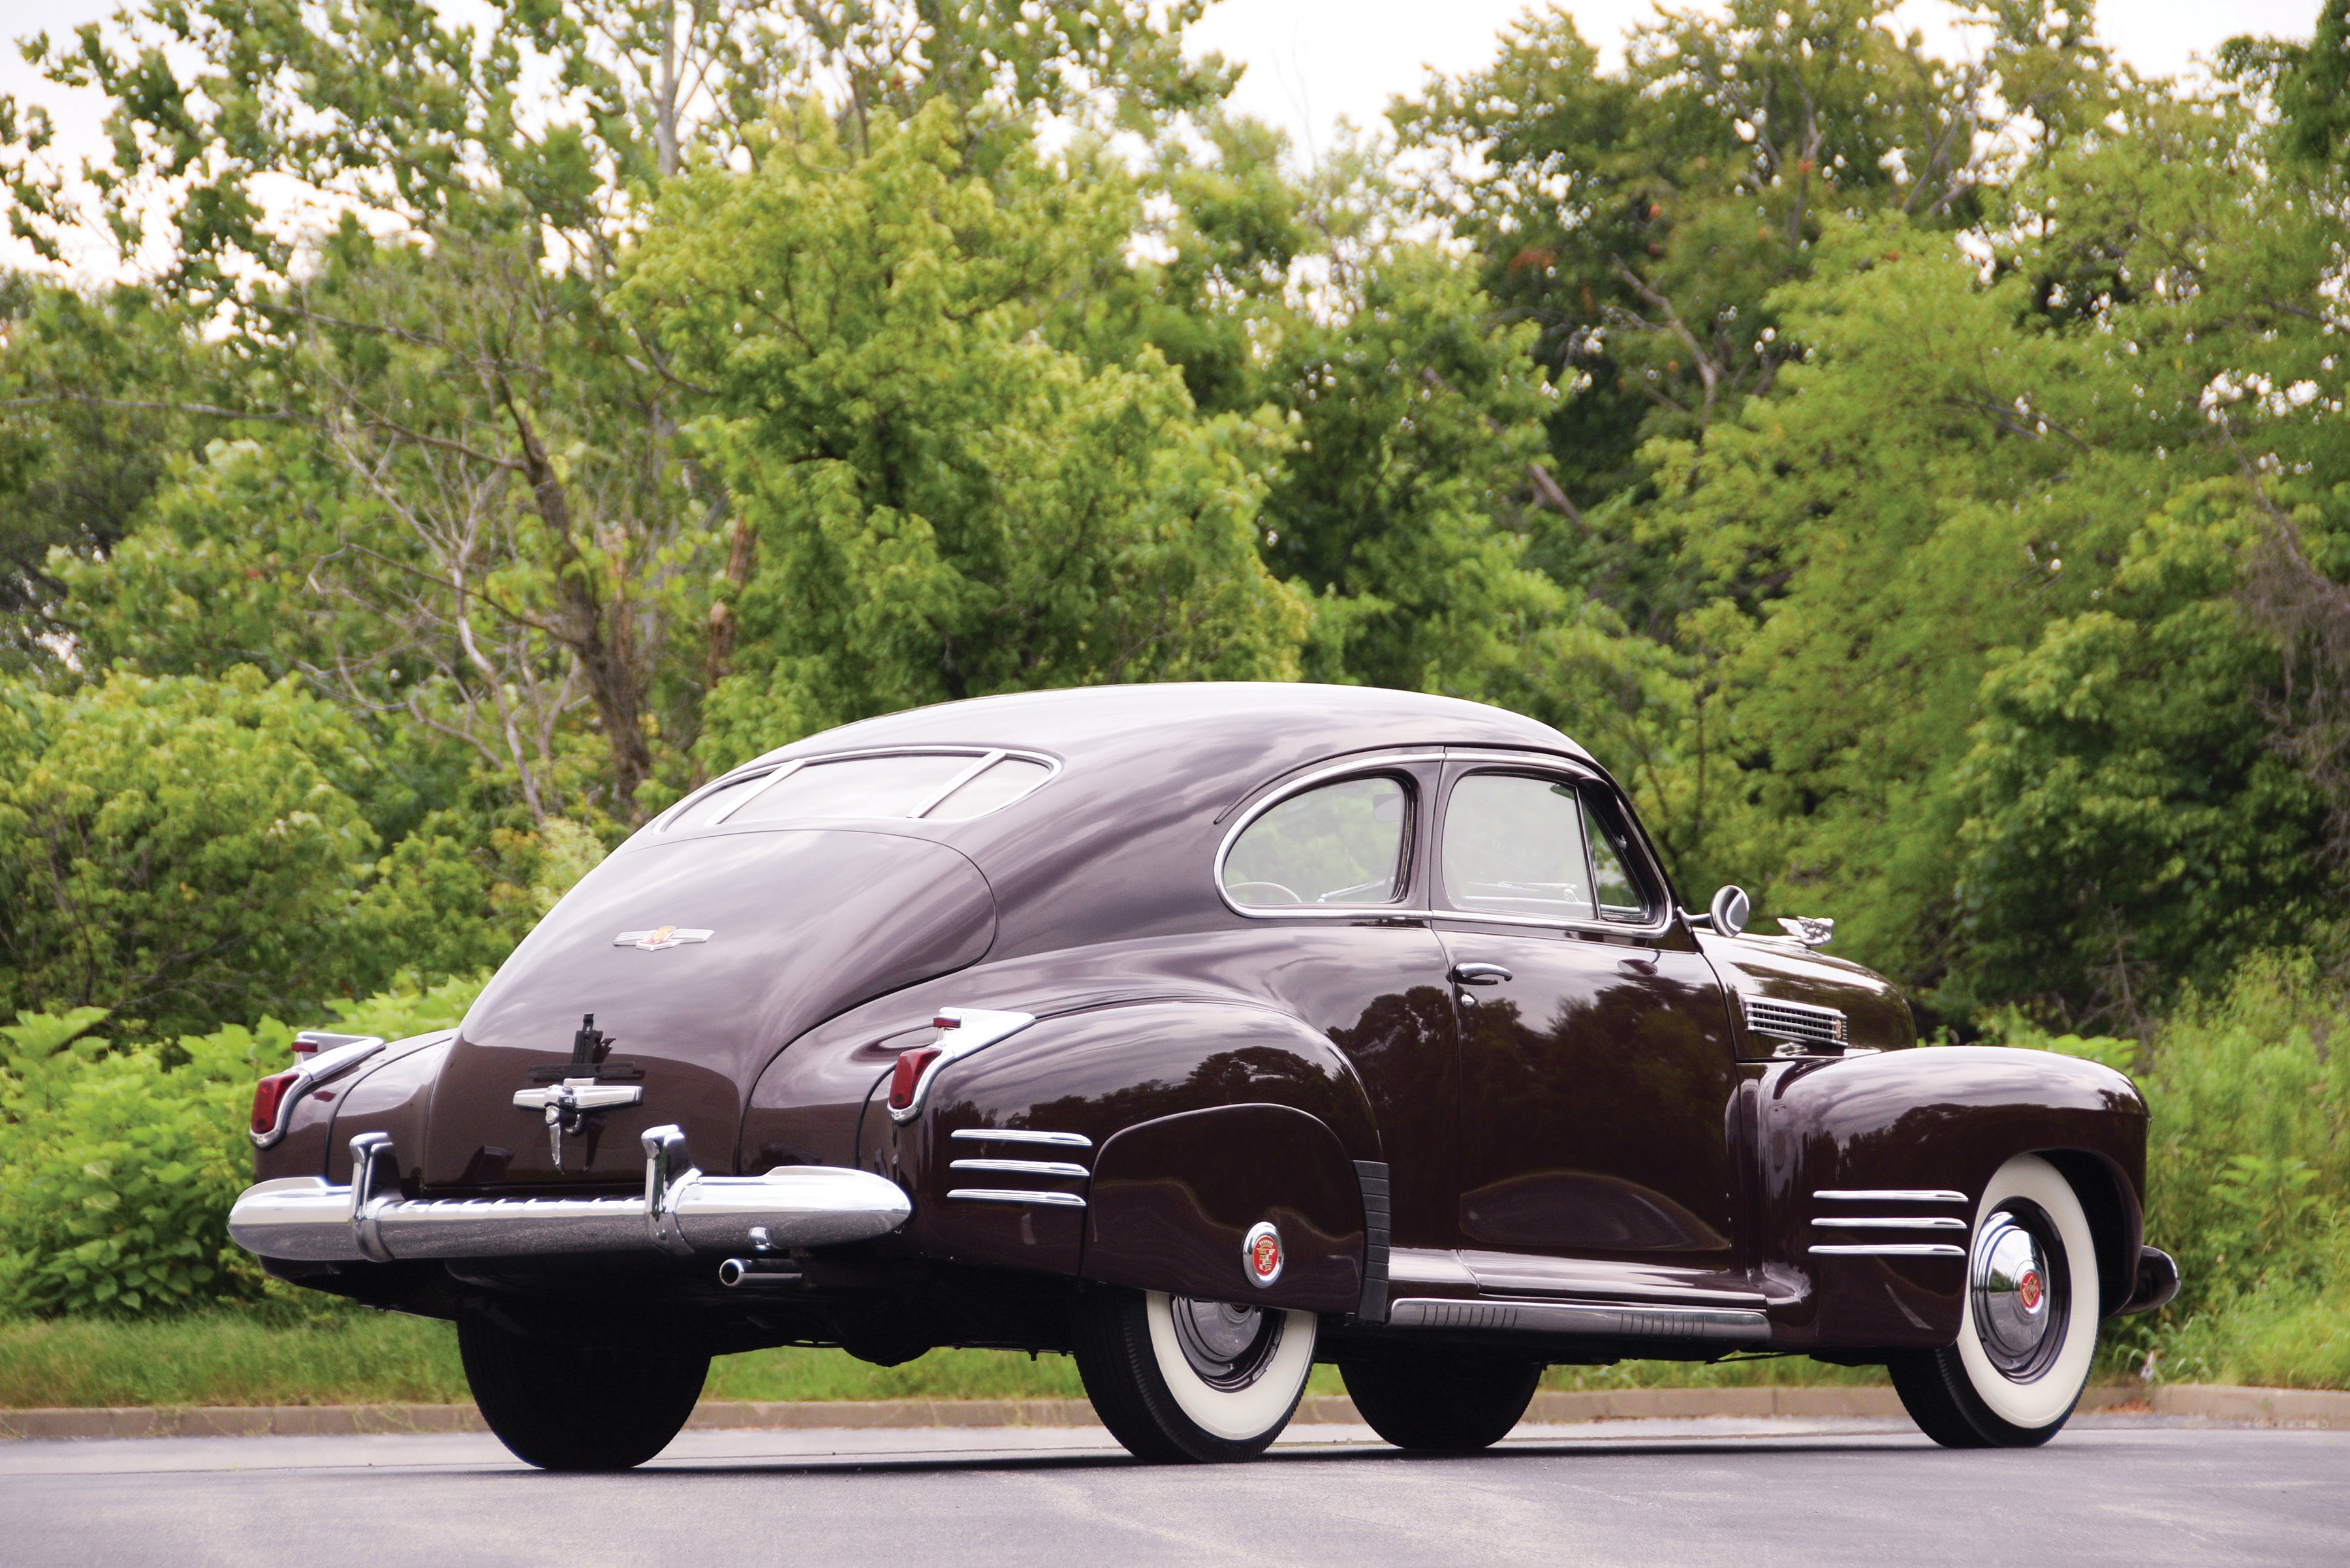 1941, Cadillac, Sixty one, Coupe, 6127, Luxury, Retro Wallpaper